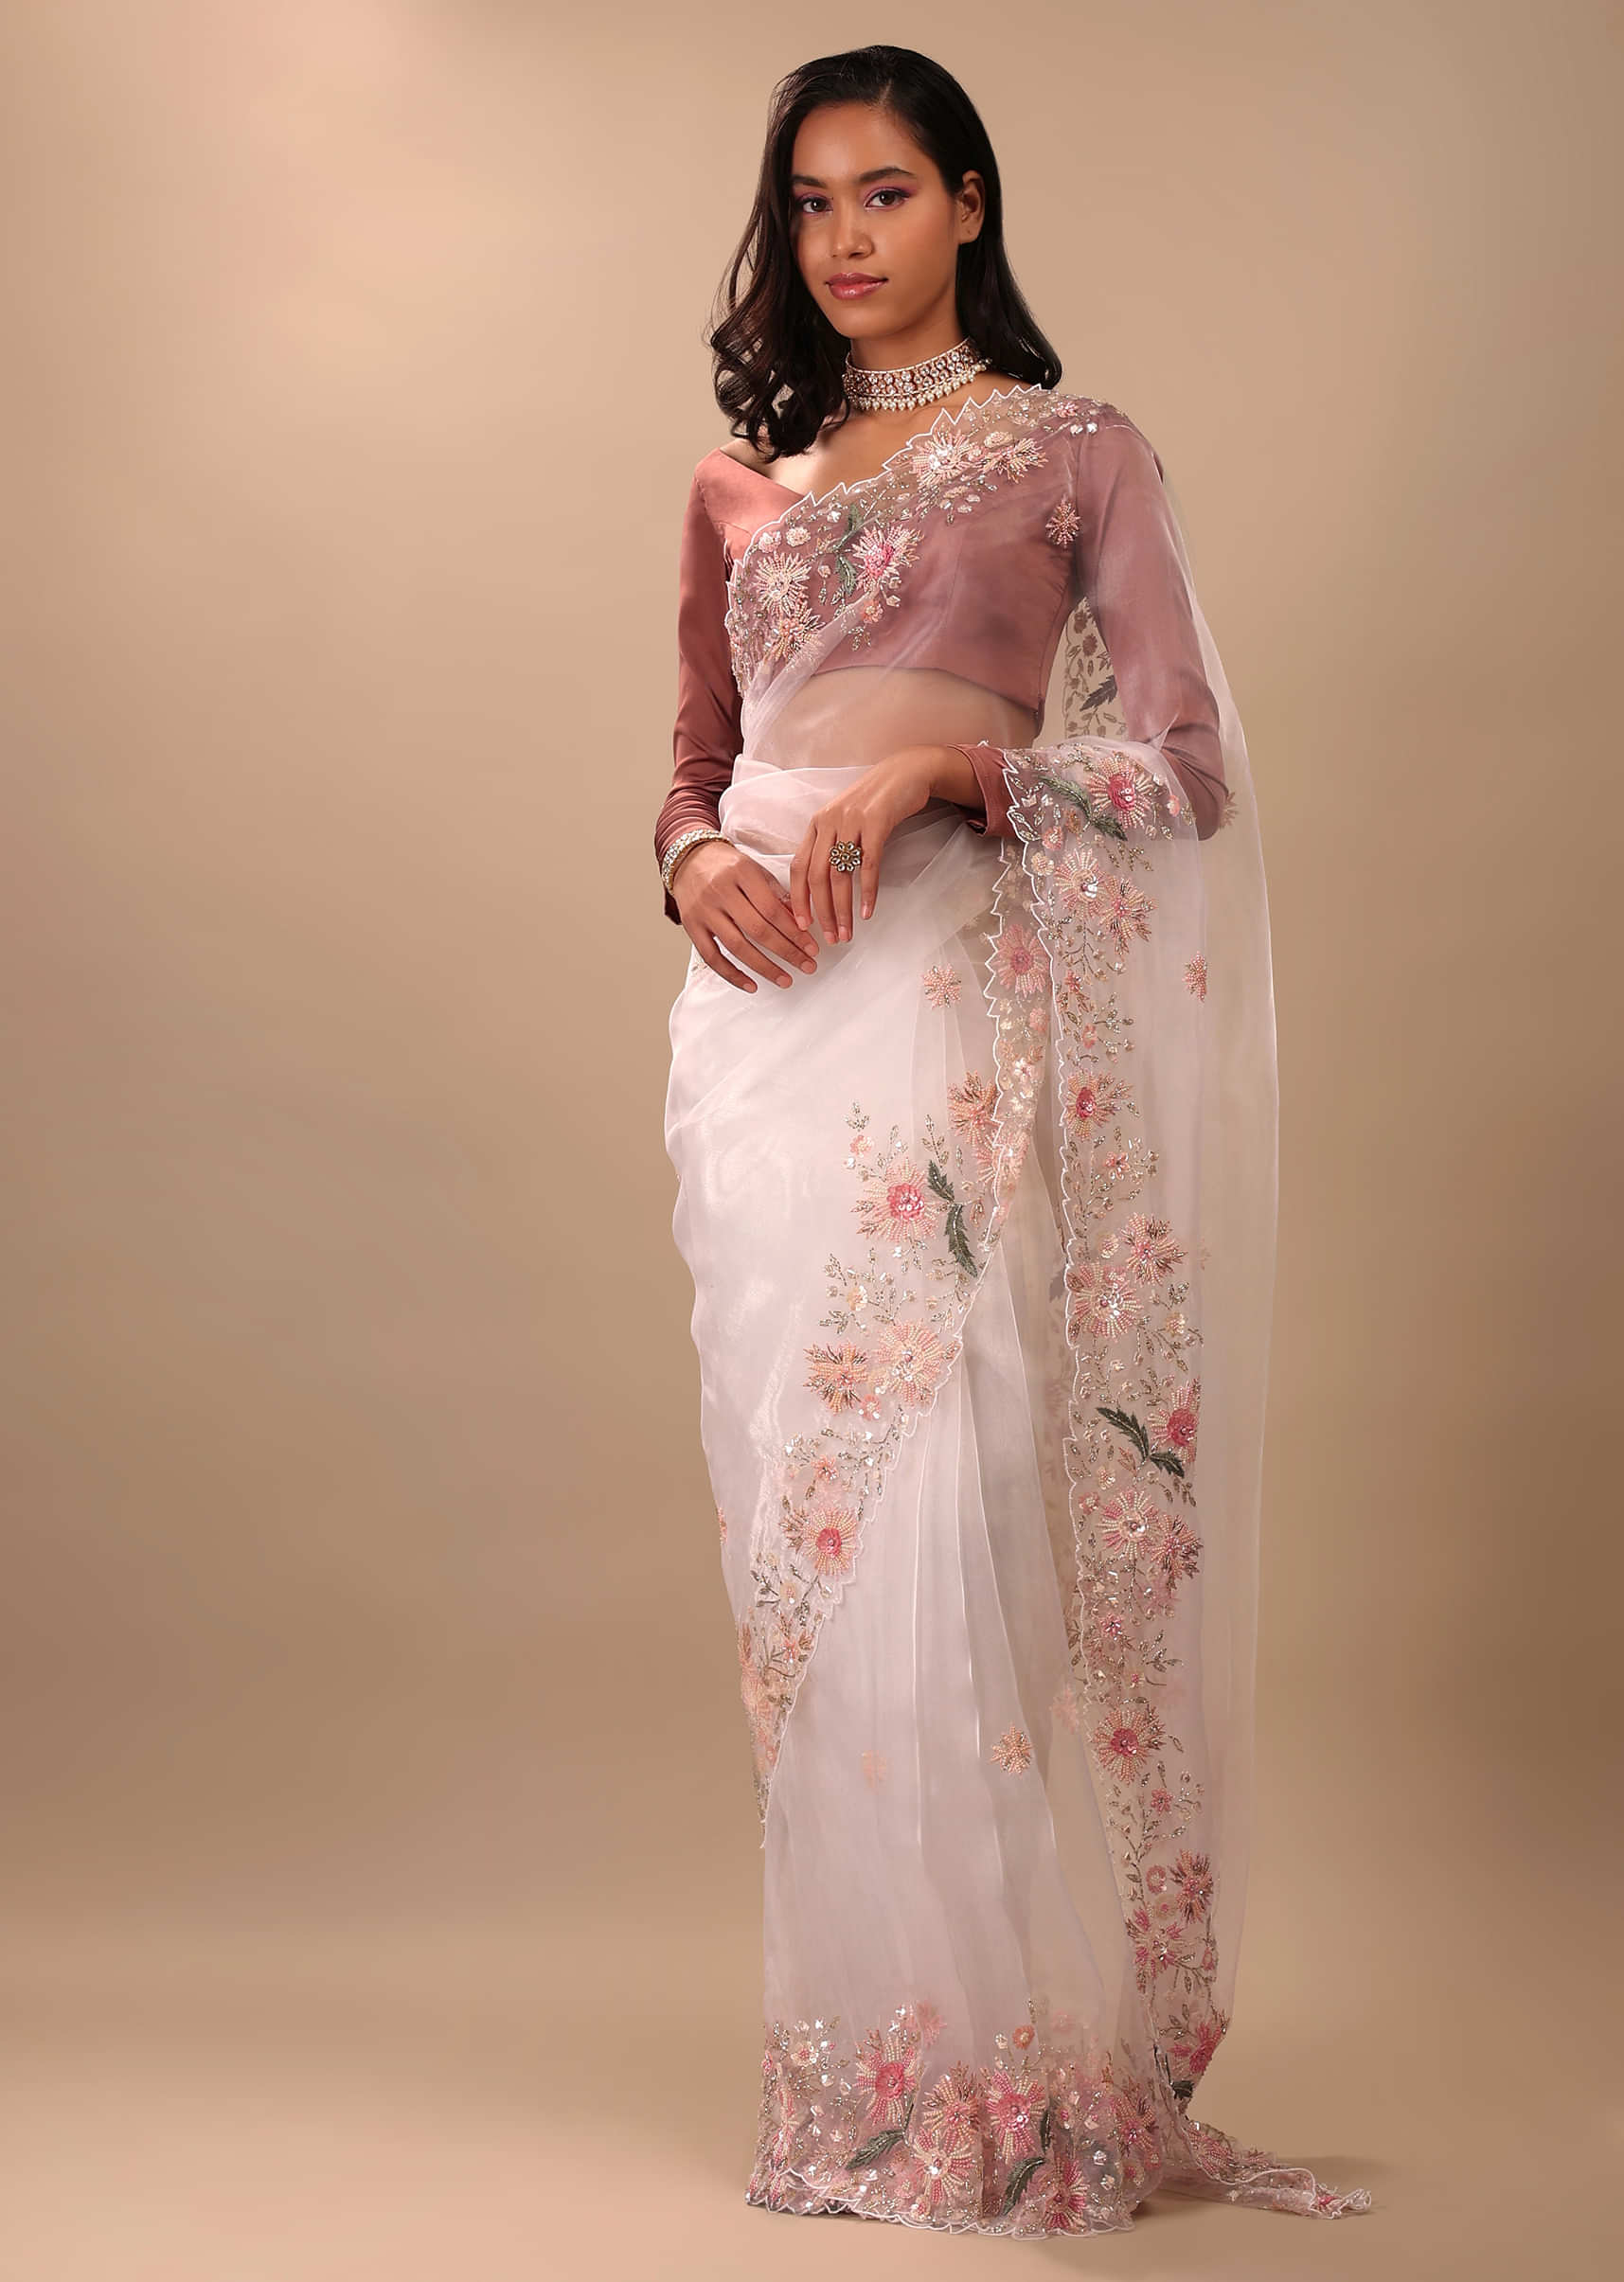 Cloud Dancer White Saree In Organza With 3D Floral Embroidery